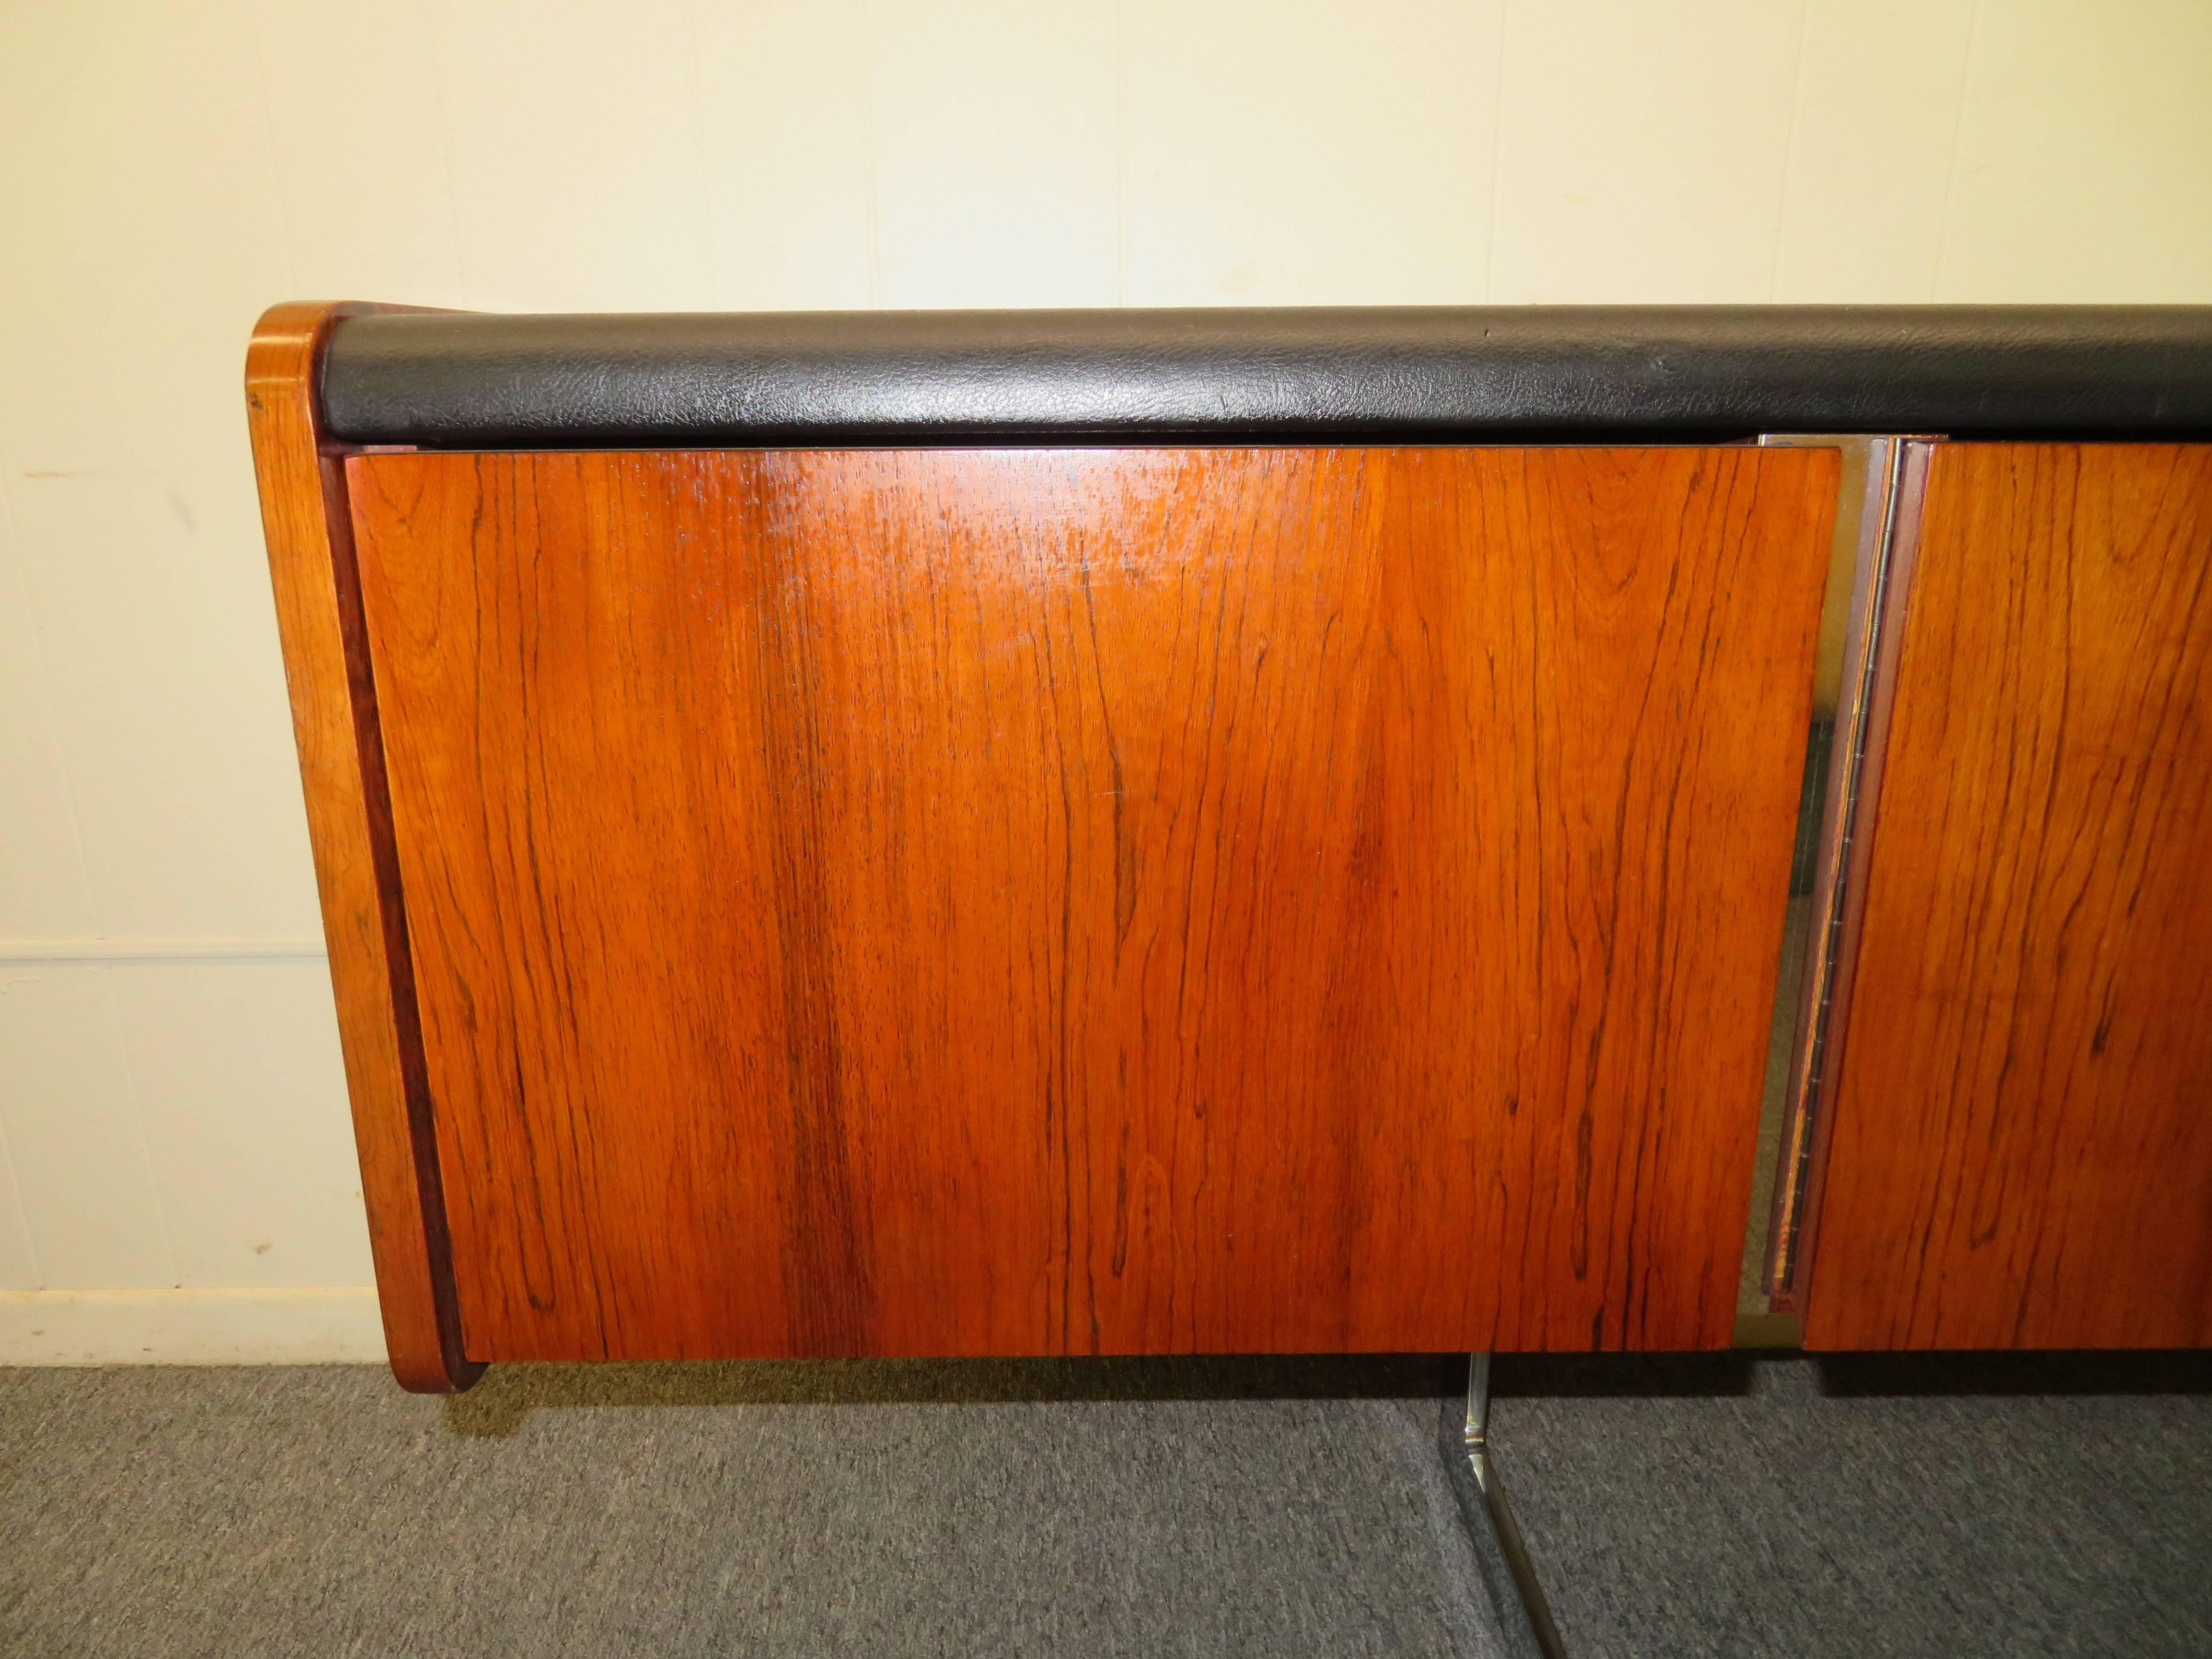 This Ste-Marie and Laurent sideboard has beautiful rosewood grain and a black faux leather top. This Mid-Century credenza floats on a modern chrome cantilever base and is finished on all sides. Left drawer holds hanging files and would be perfect